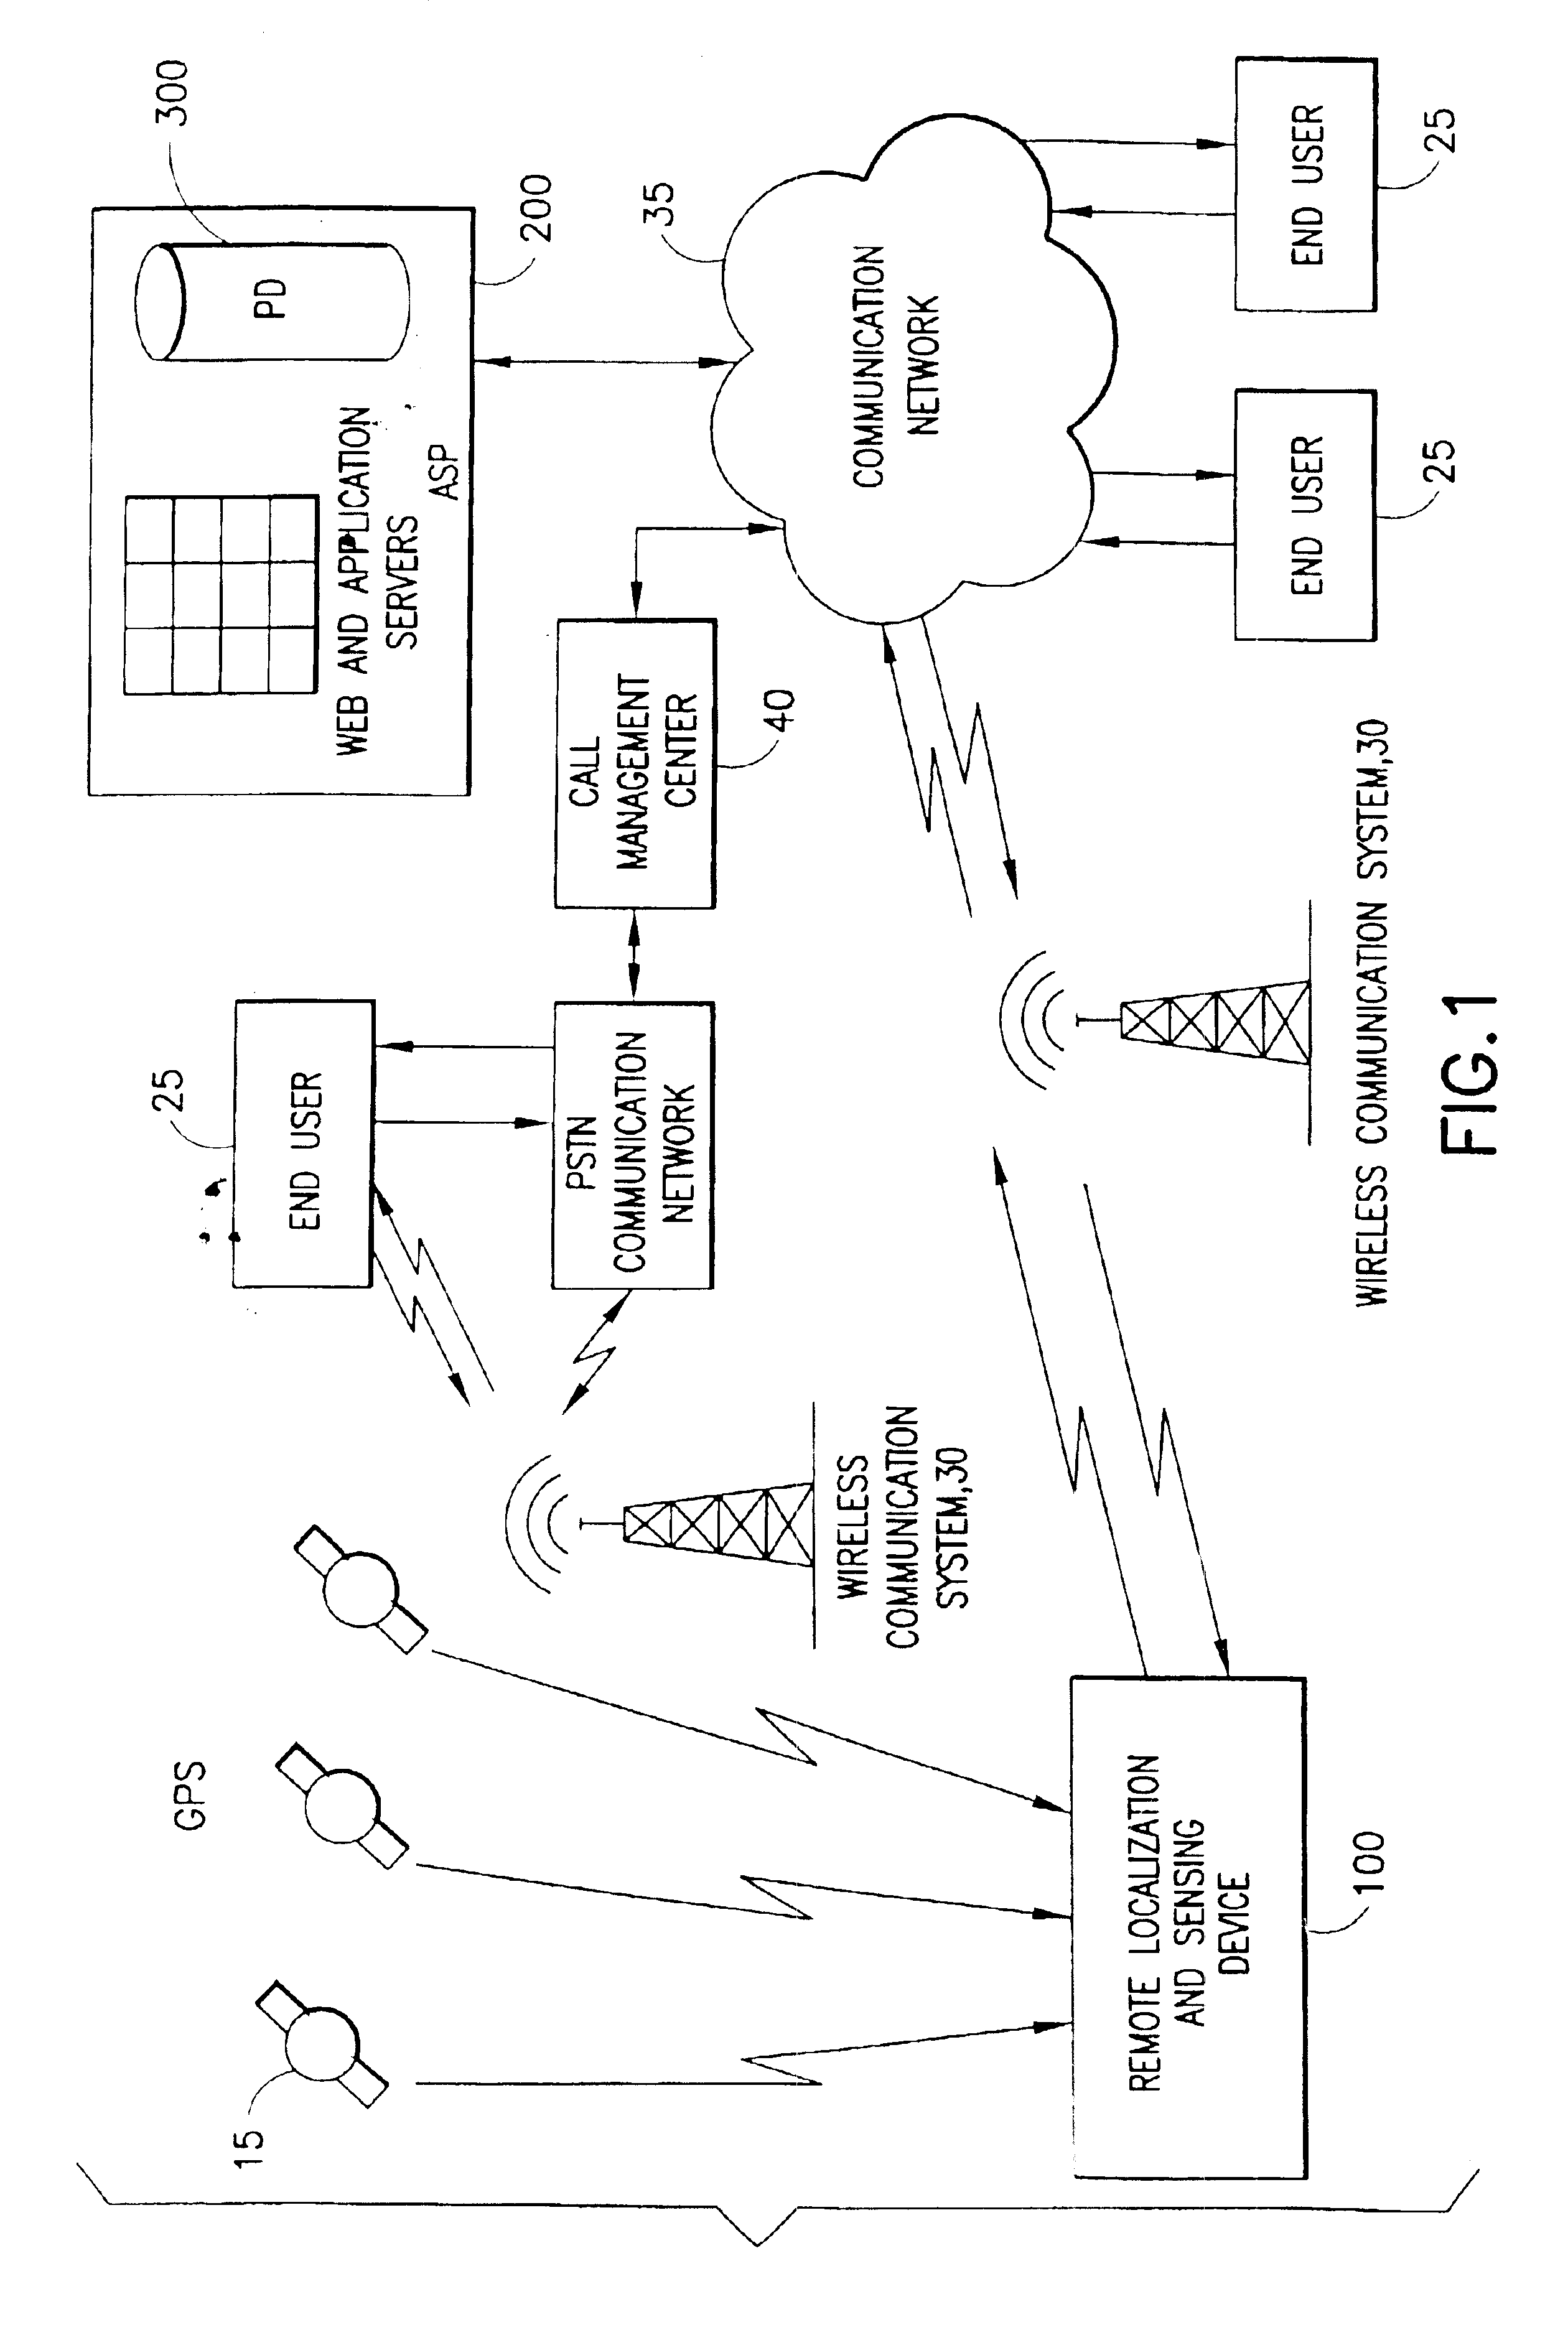 System for localizing and sensing objects and providing alerts